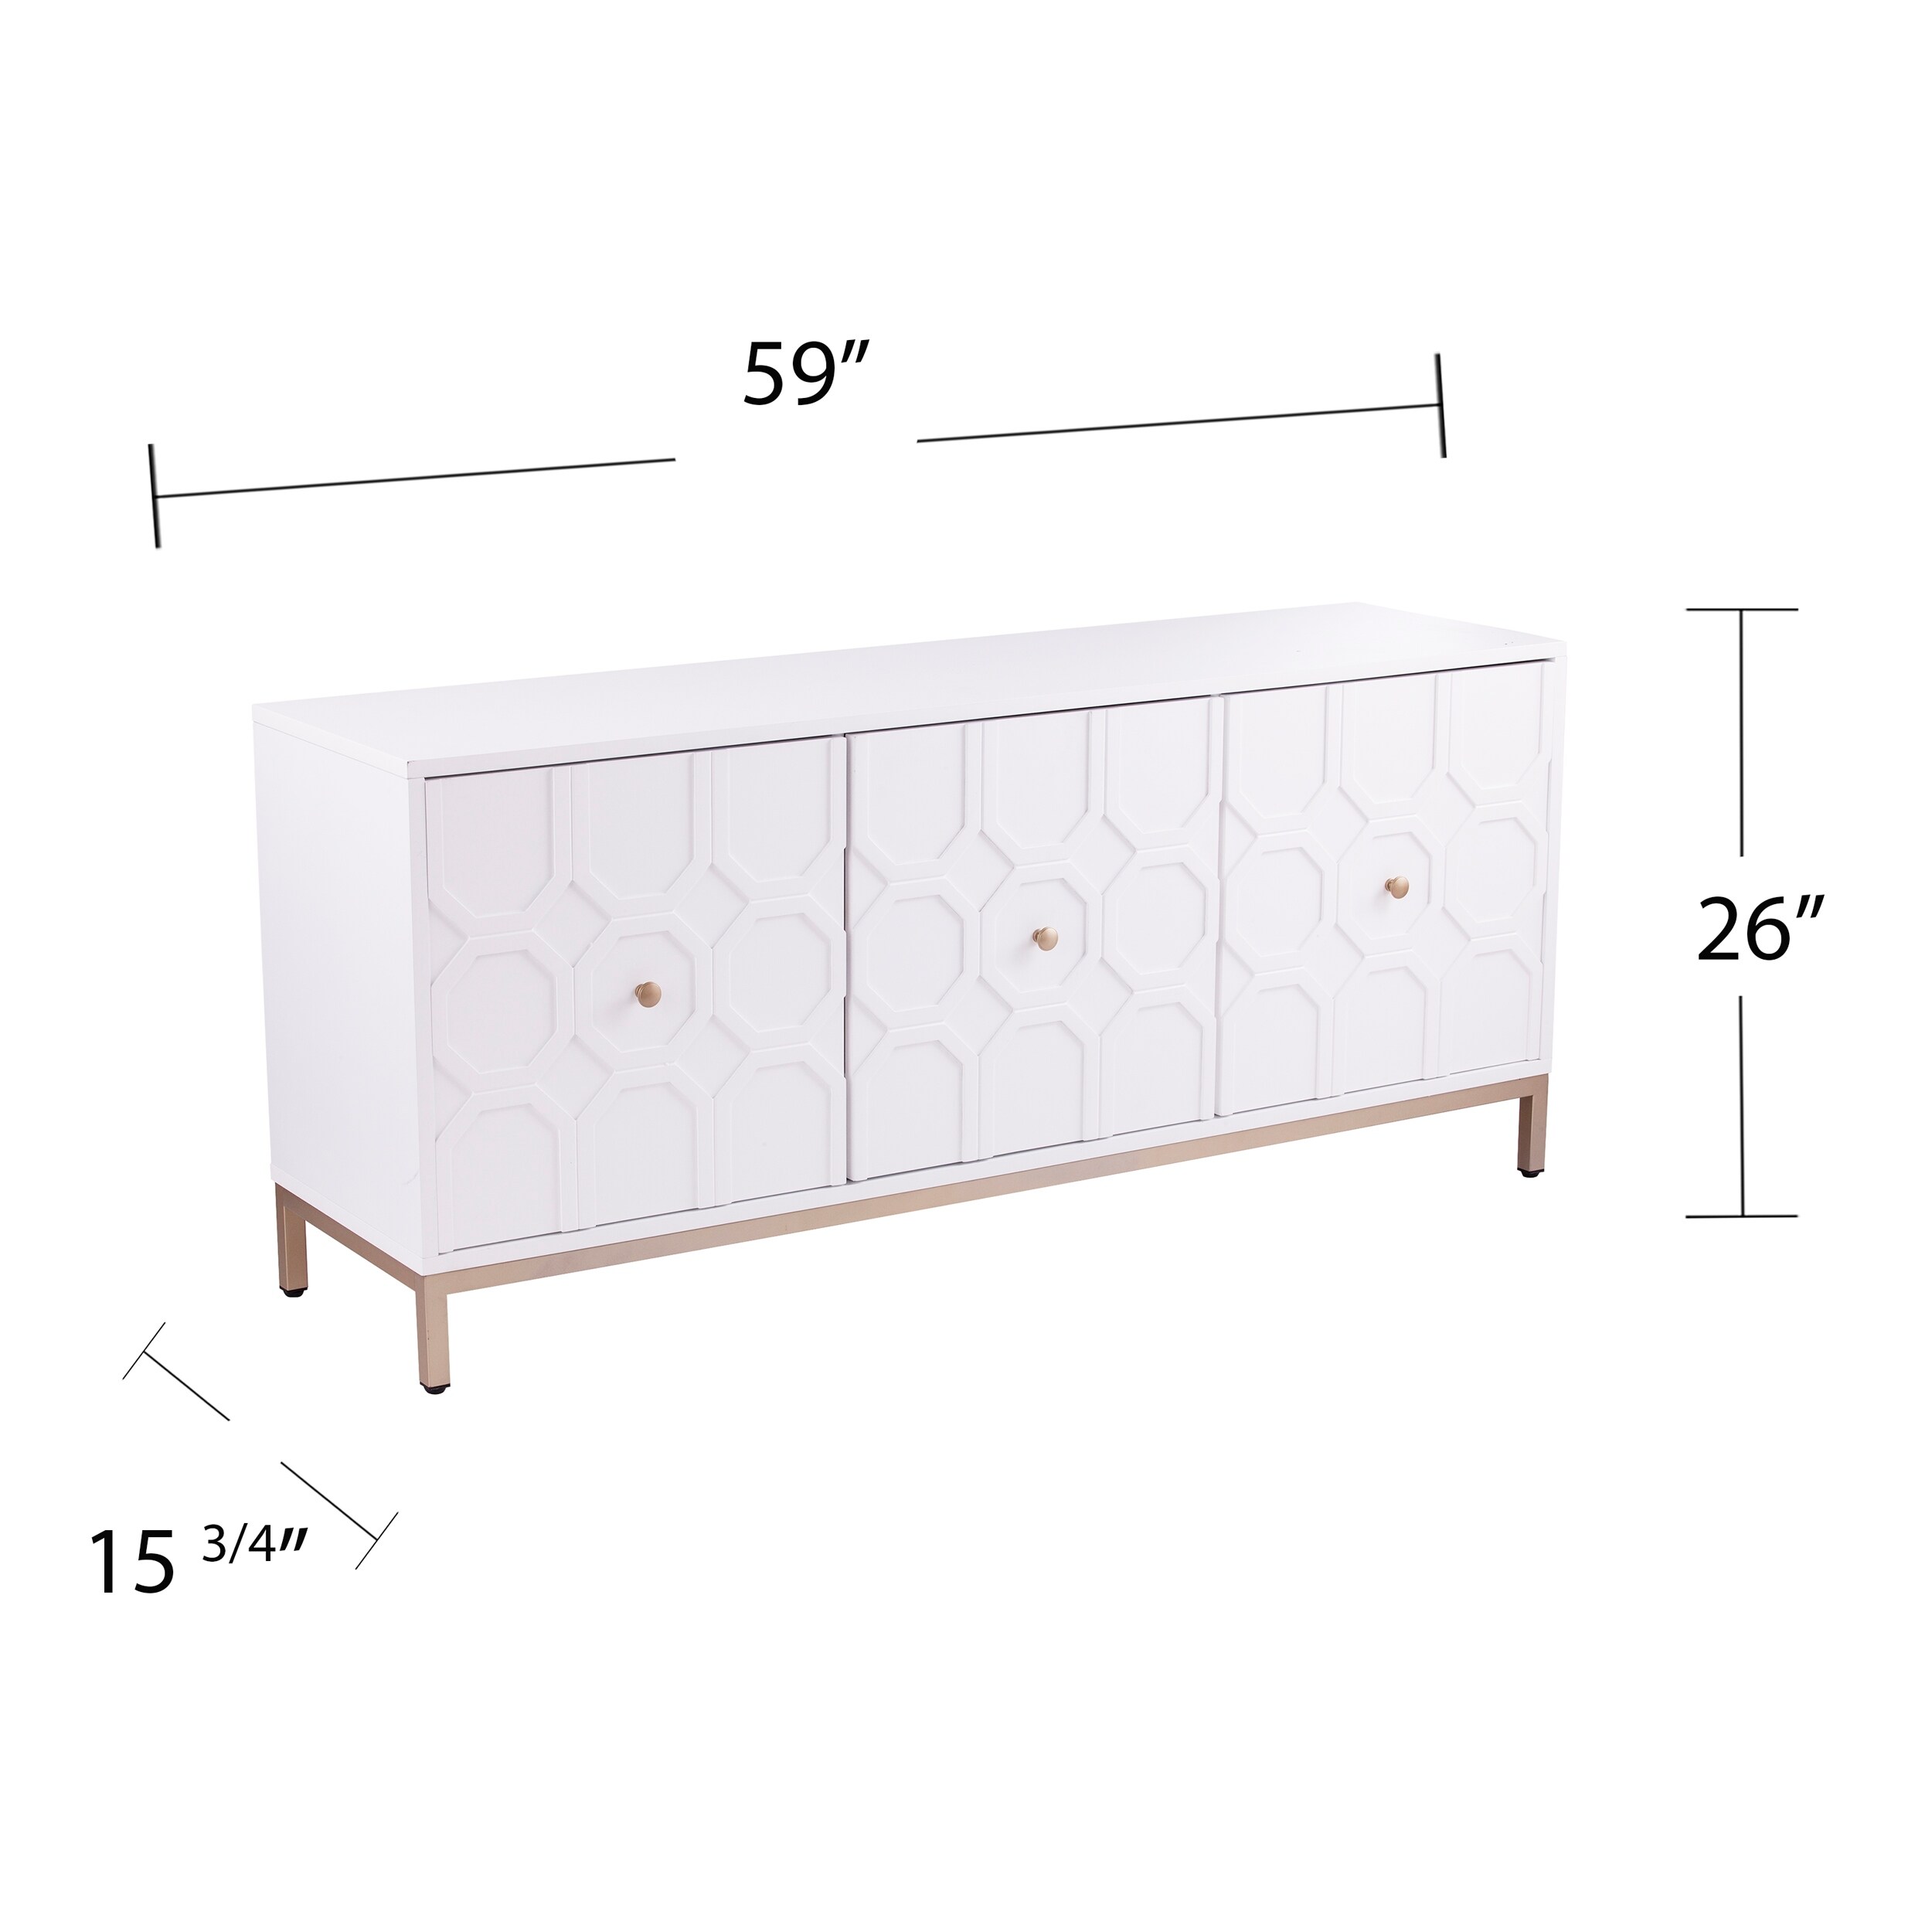 SEI Furniture Gliday Contemporary White Wood 3-Door Buffet Sideboard Accent Cabinet